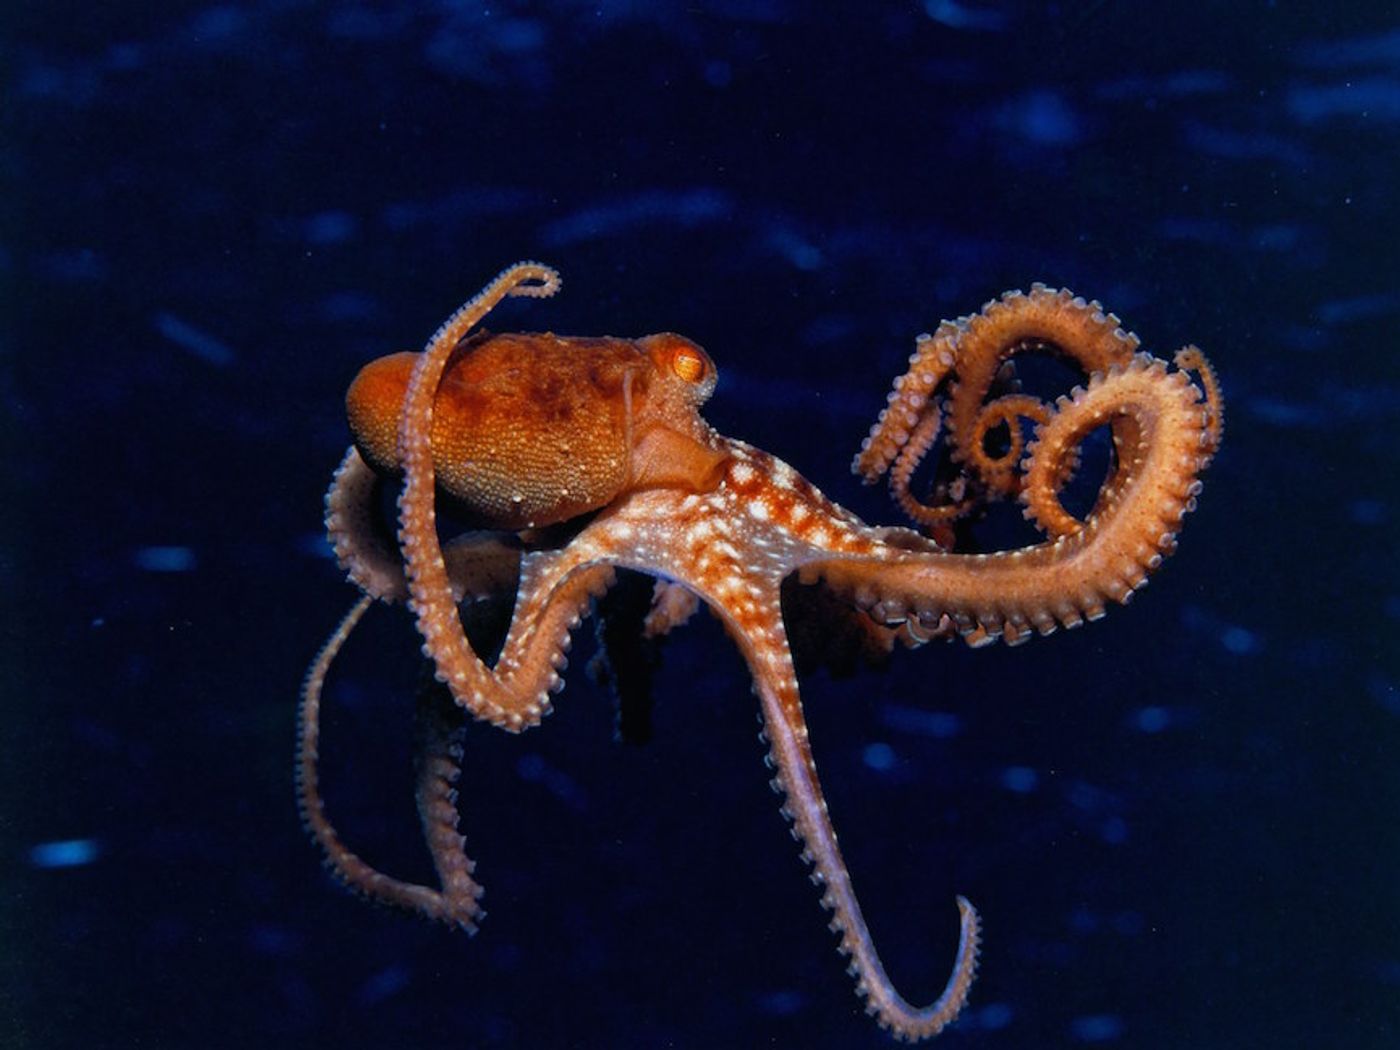 The orientation of an octopus' body and crawling direction are independently controlled, and its crawling lacks any apparent rhythmical patterns in limb coordination.